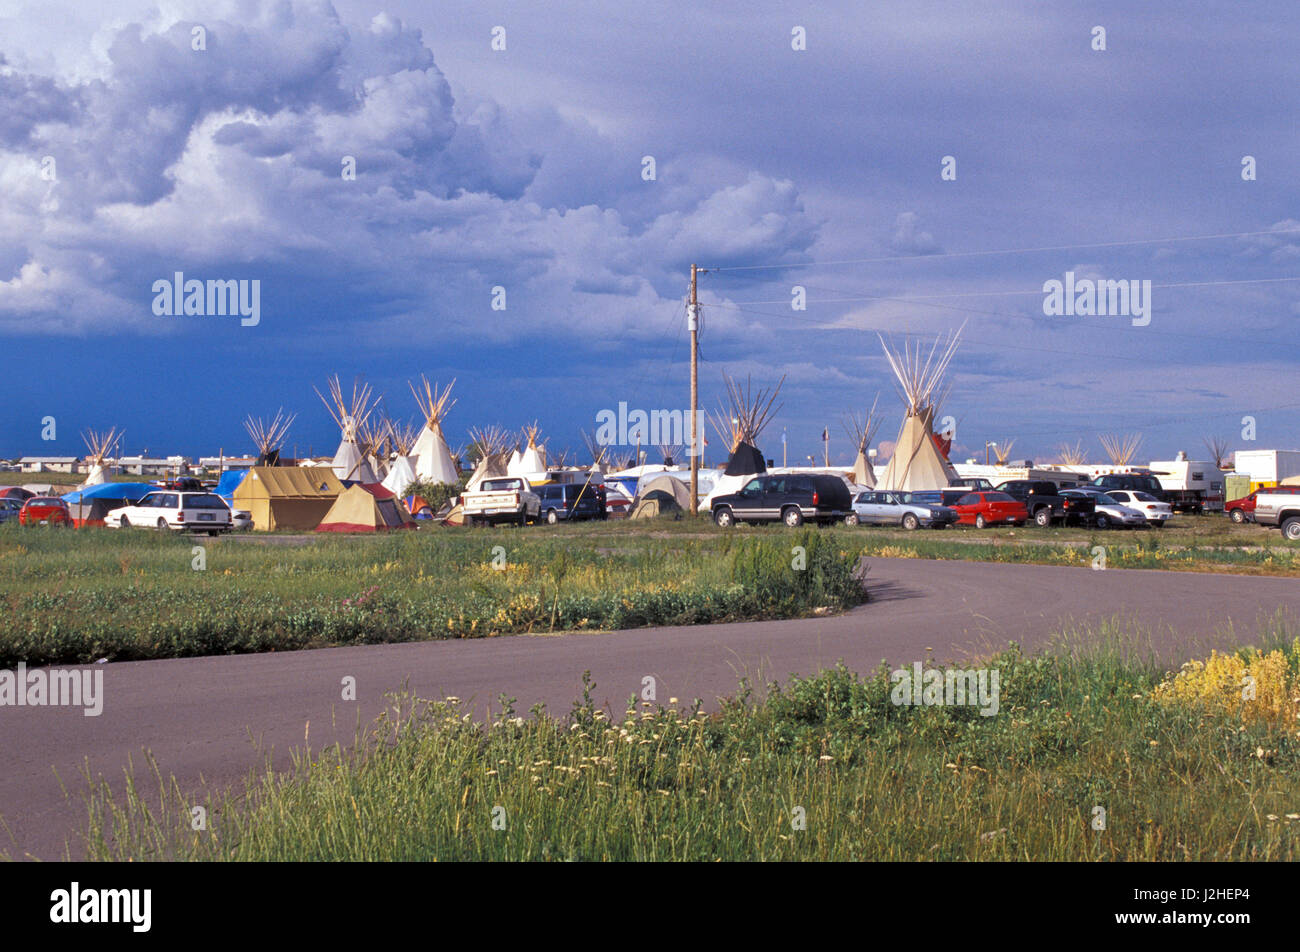 Blackfeet tepee encampment during the Annual Indian Days Festival in Browning Montana Stock Photo